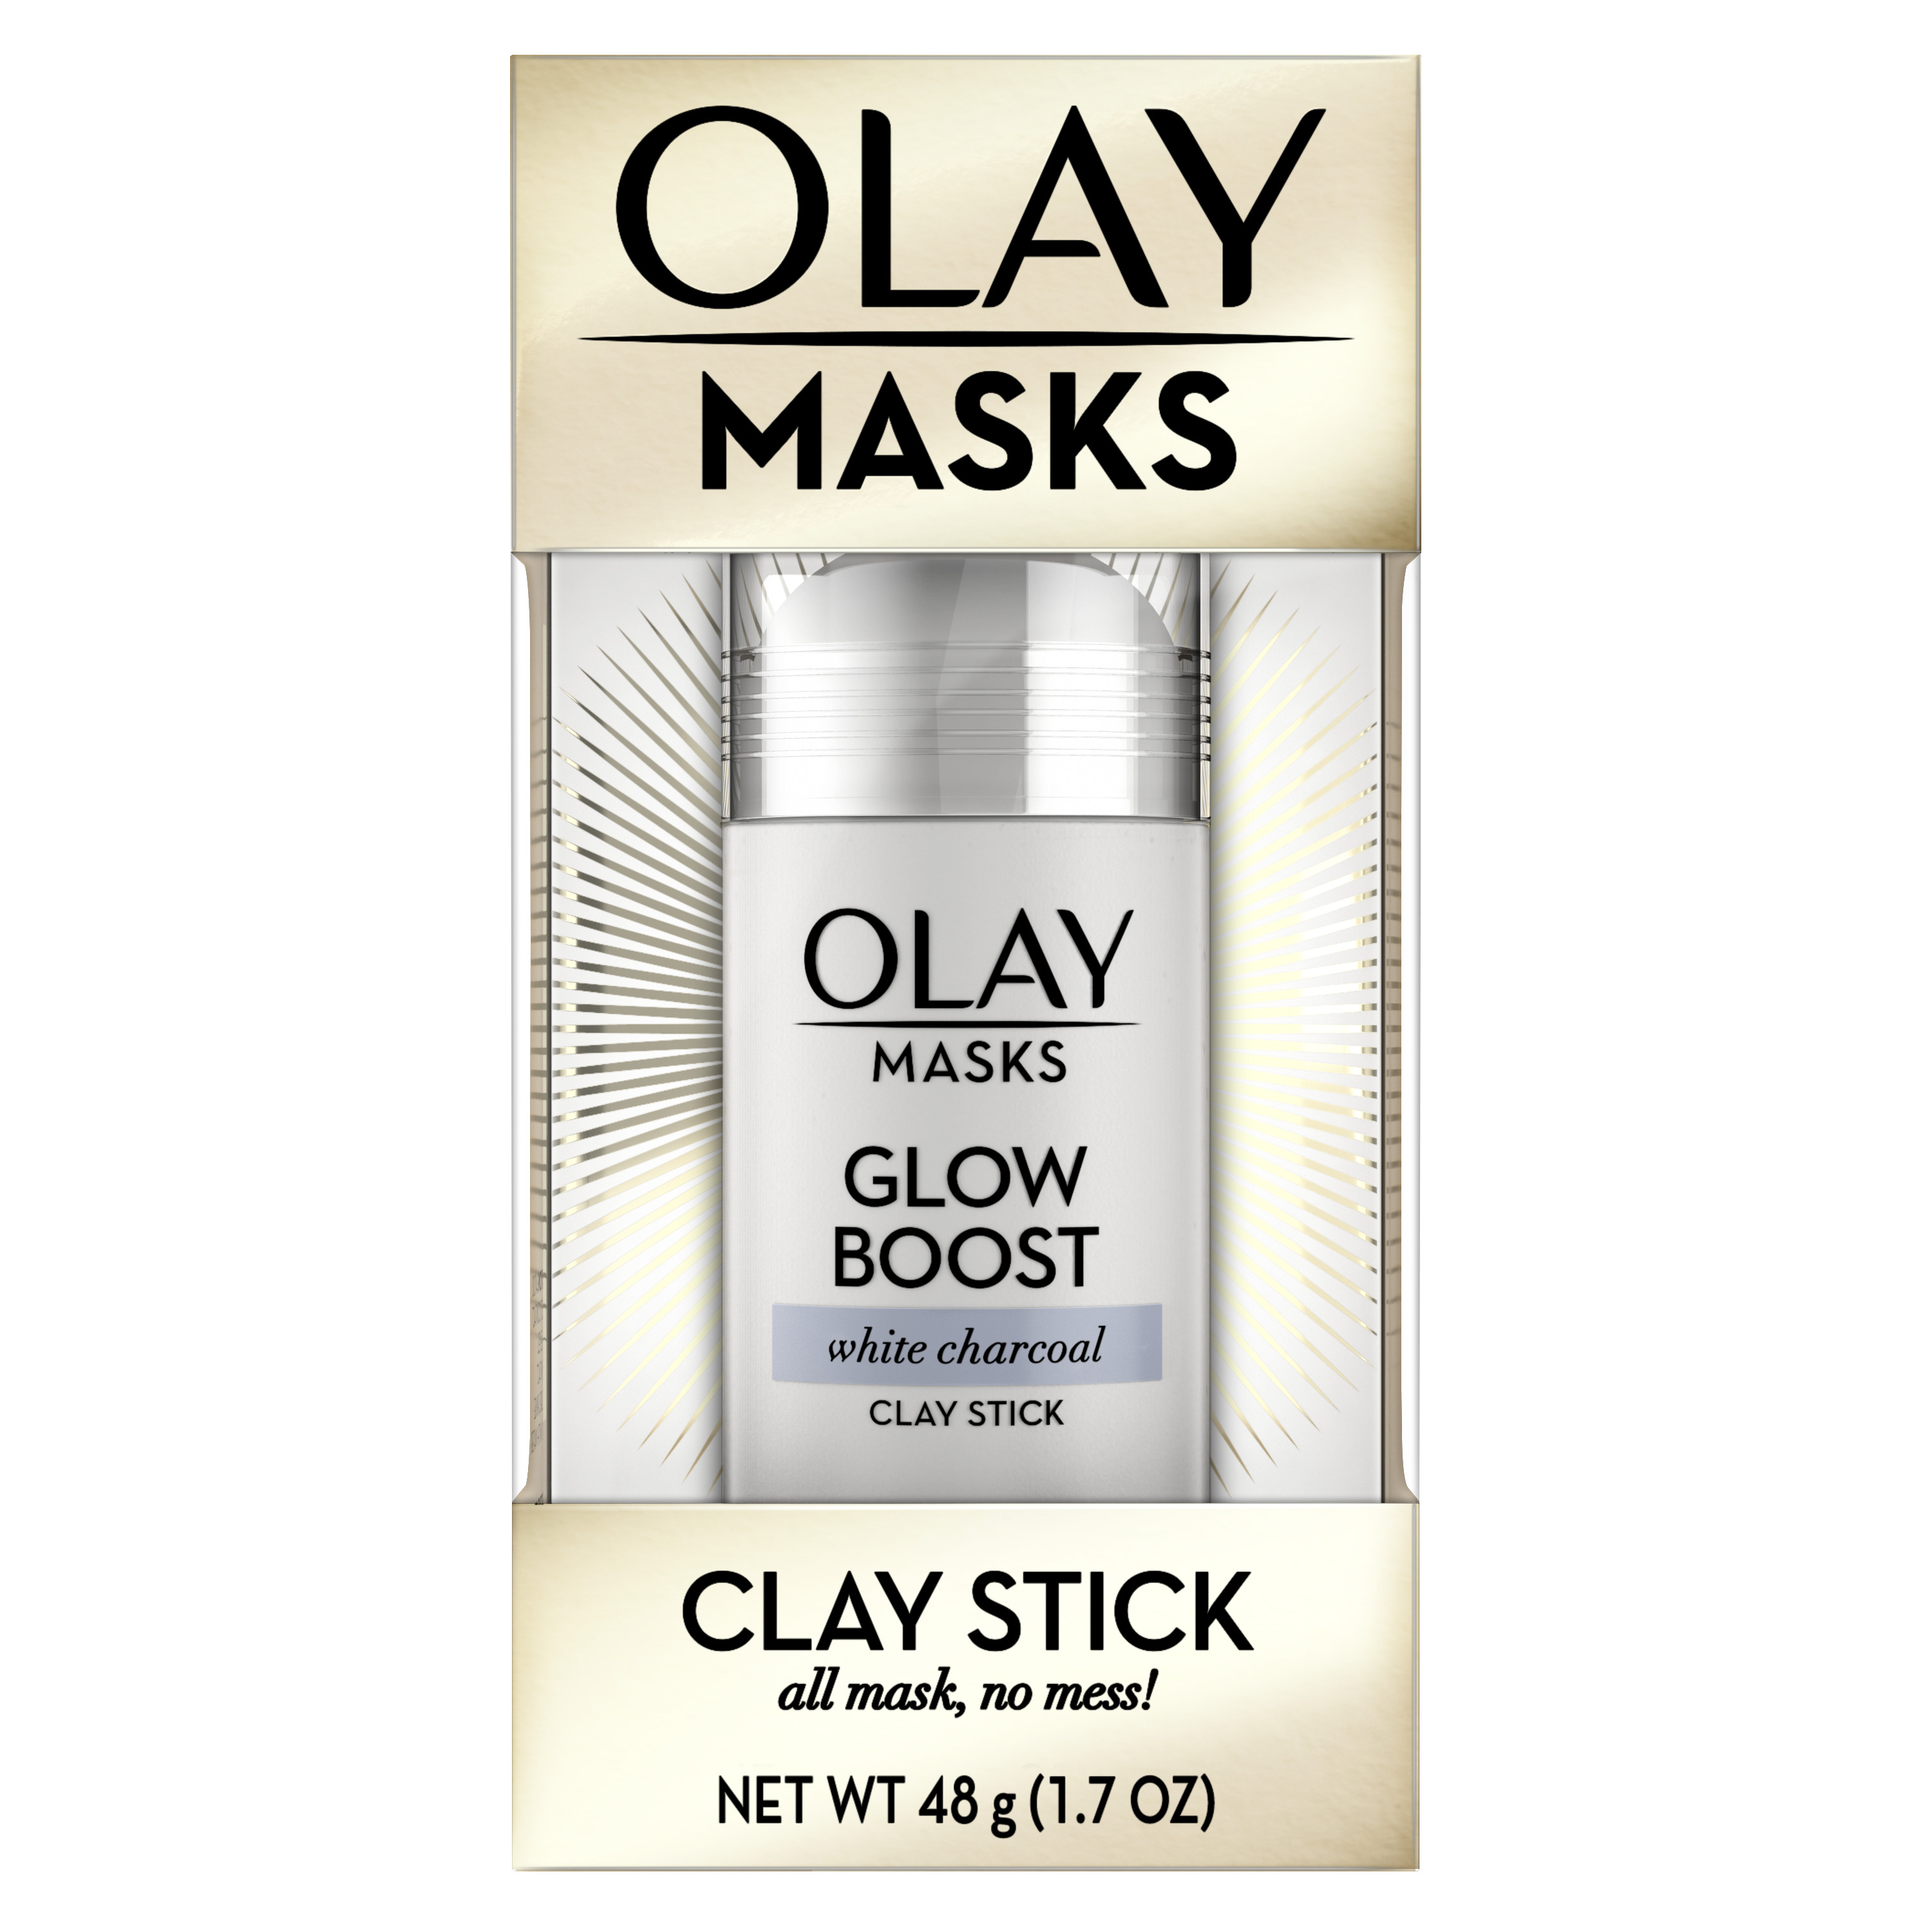 Olay Face Mask Stick, Glow Boost with White Charcoal Clay, 1.7 oz - image 3 of 9